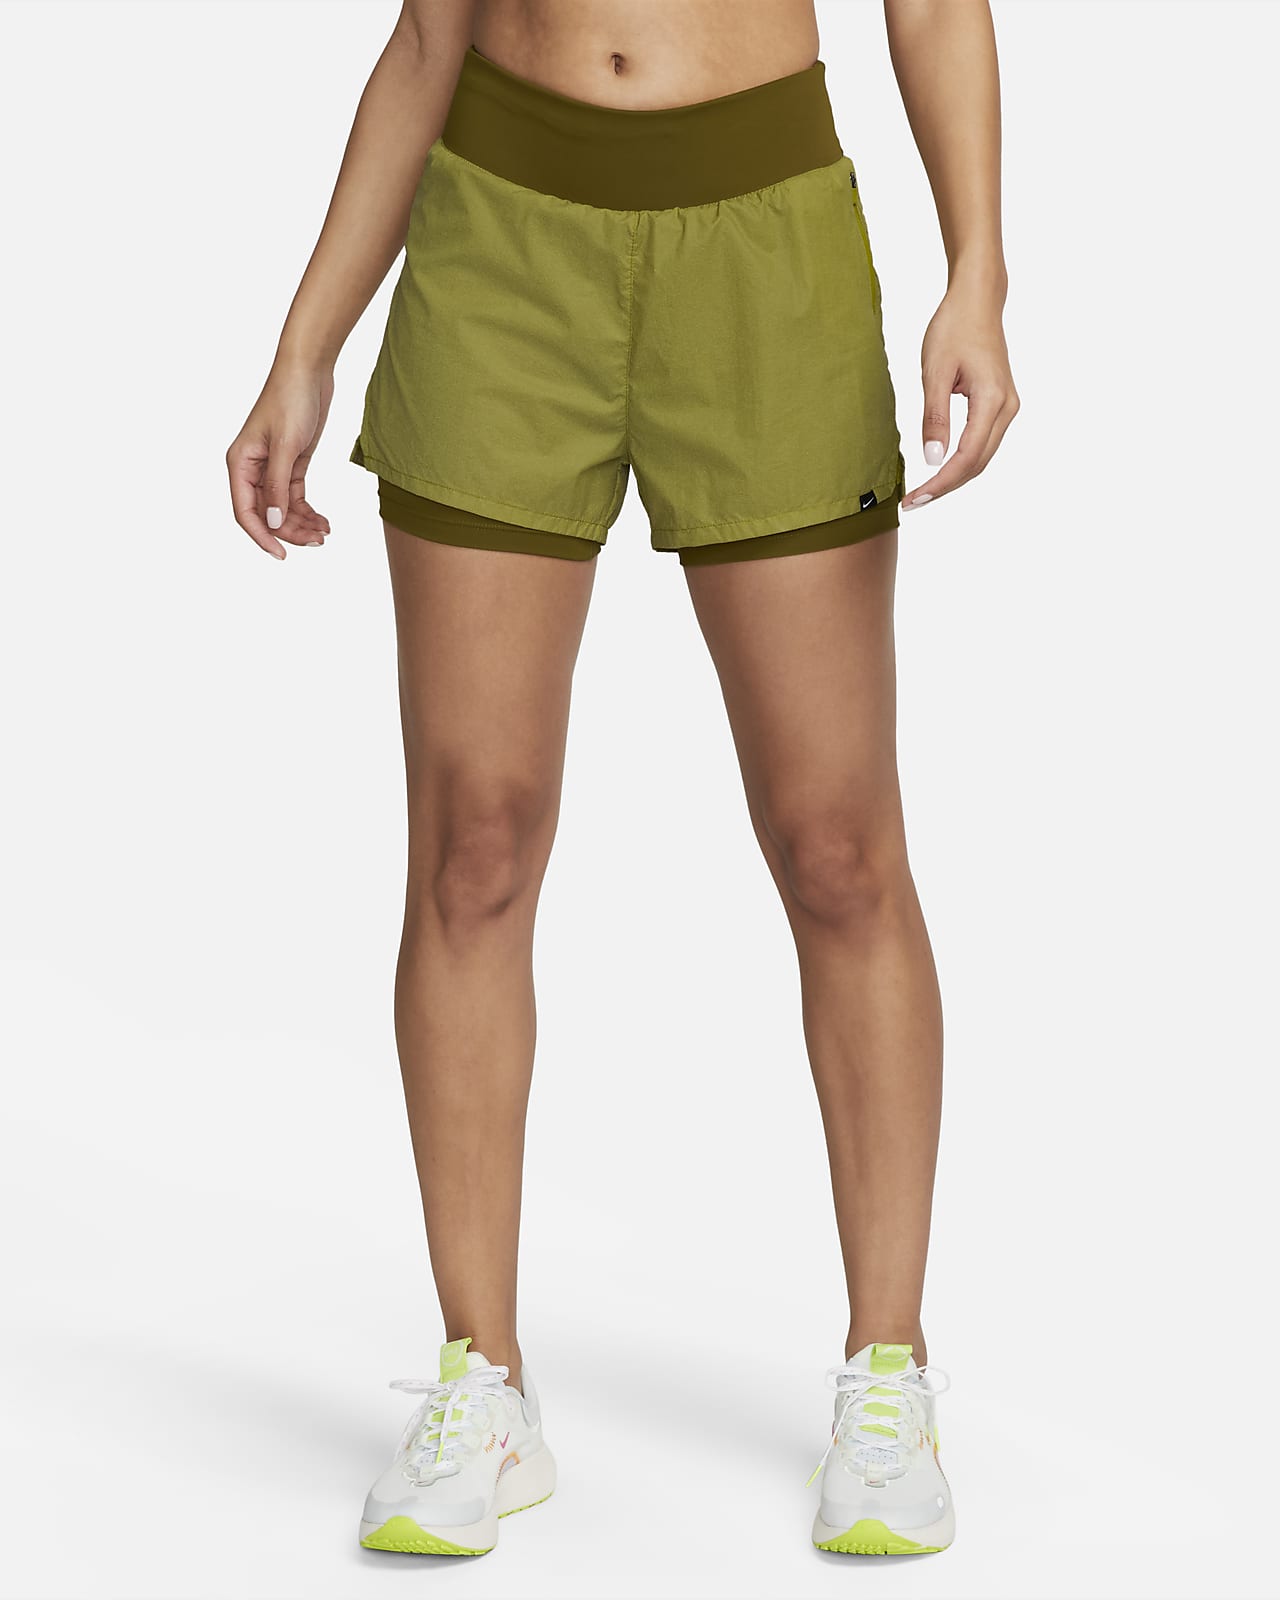 Nike Run Division Women's Mid-Rise 3 2-in-1 Reflective Shorts